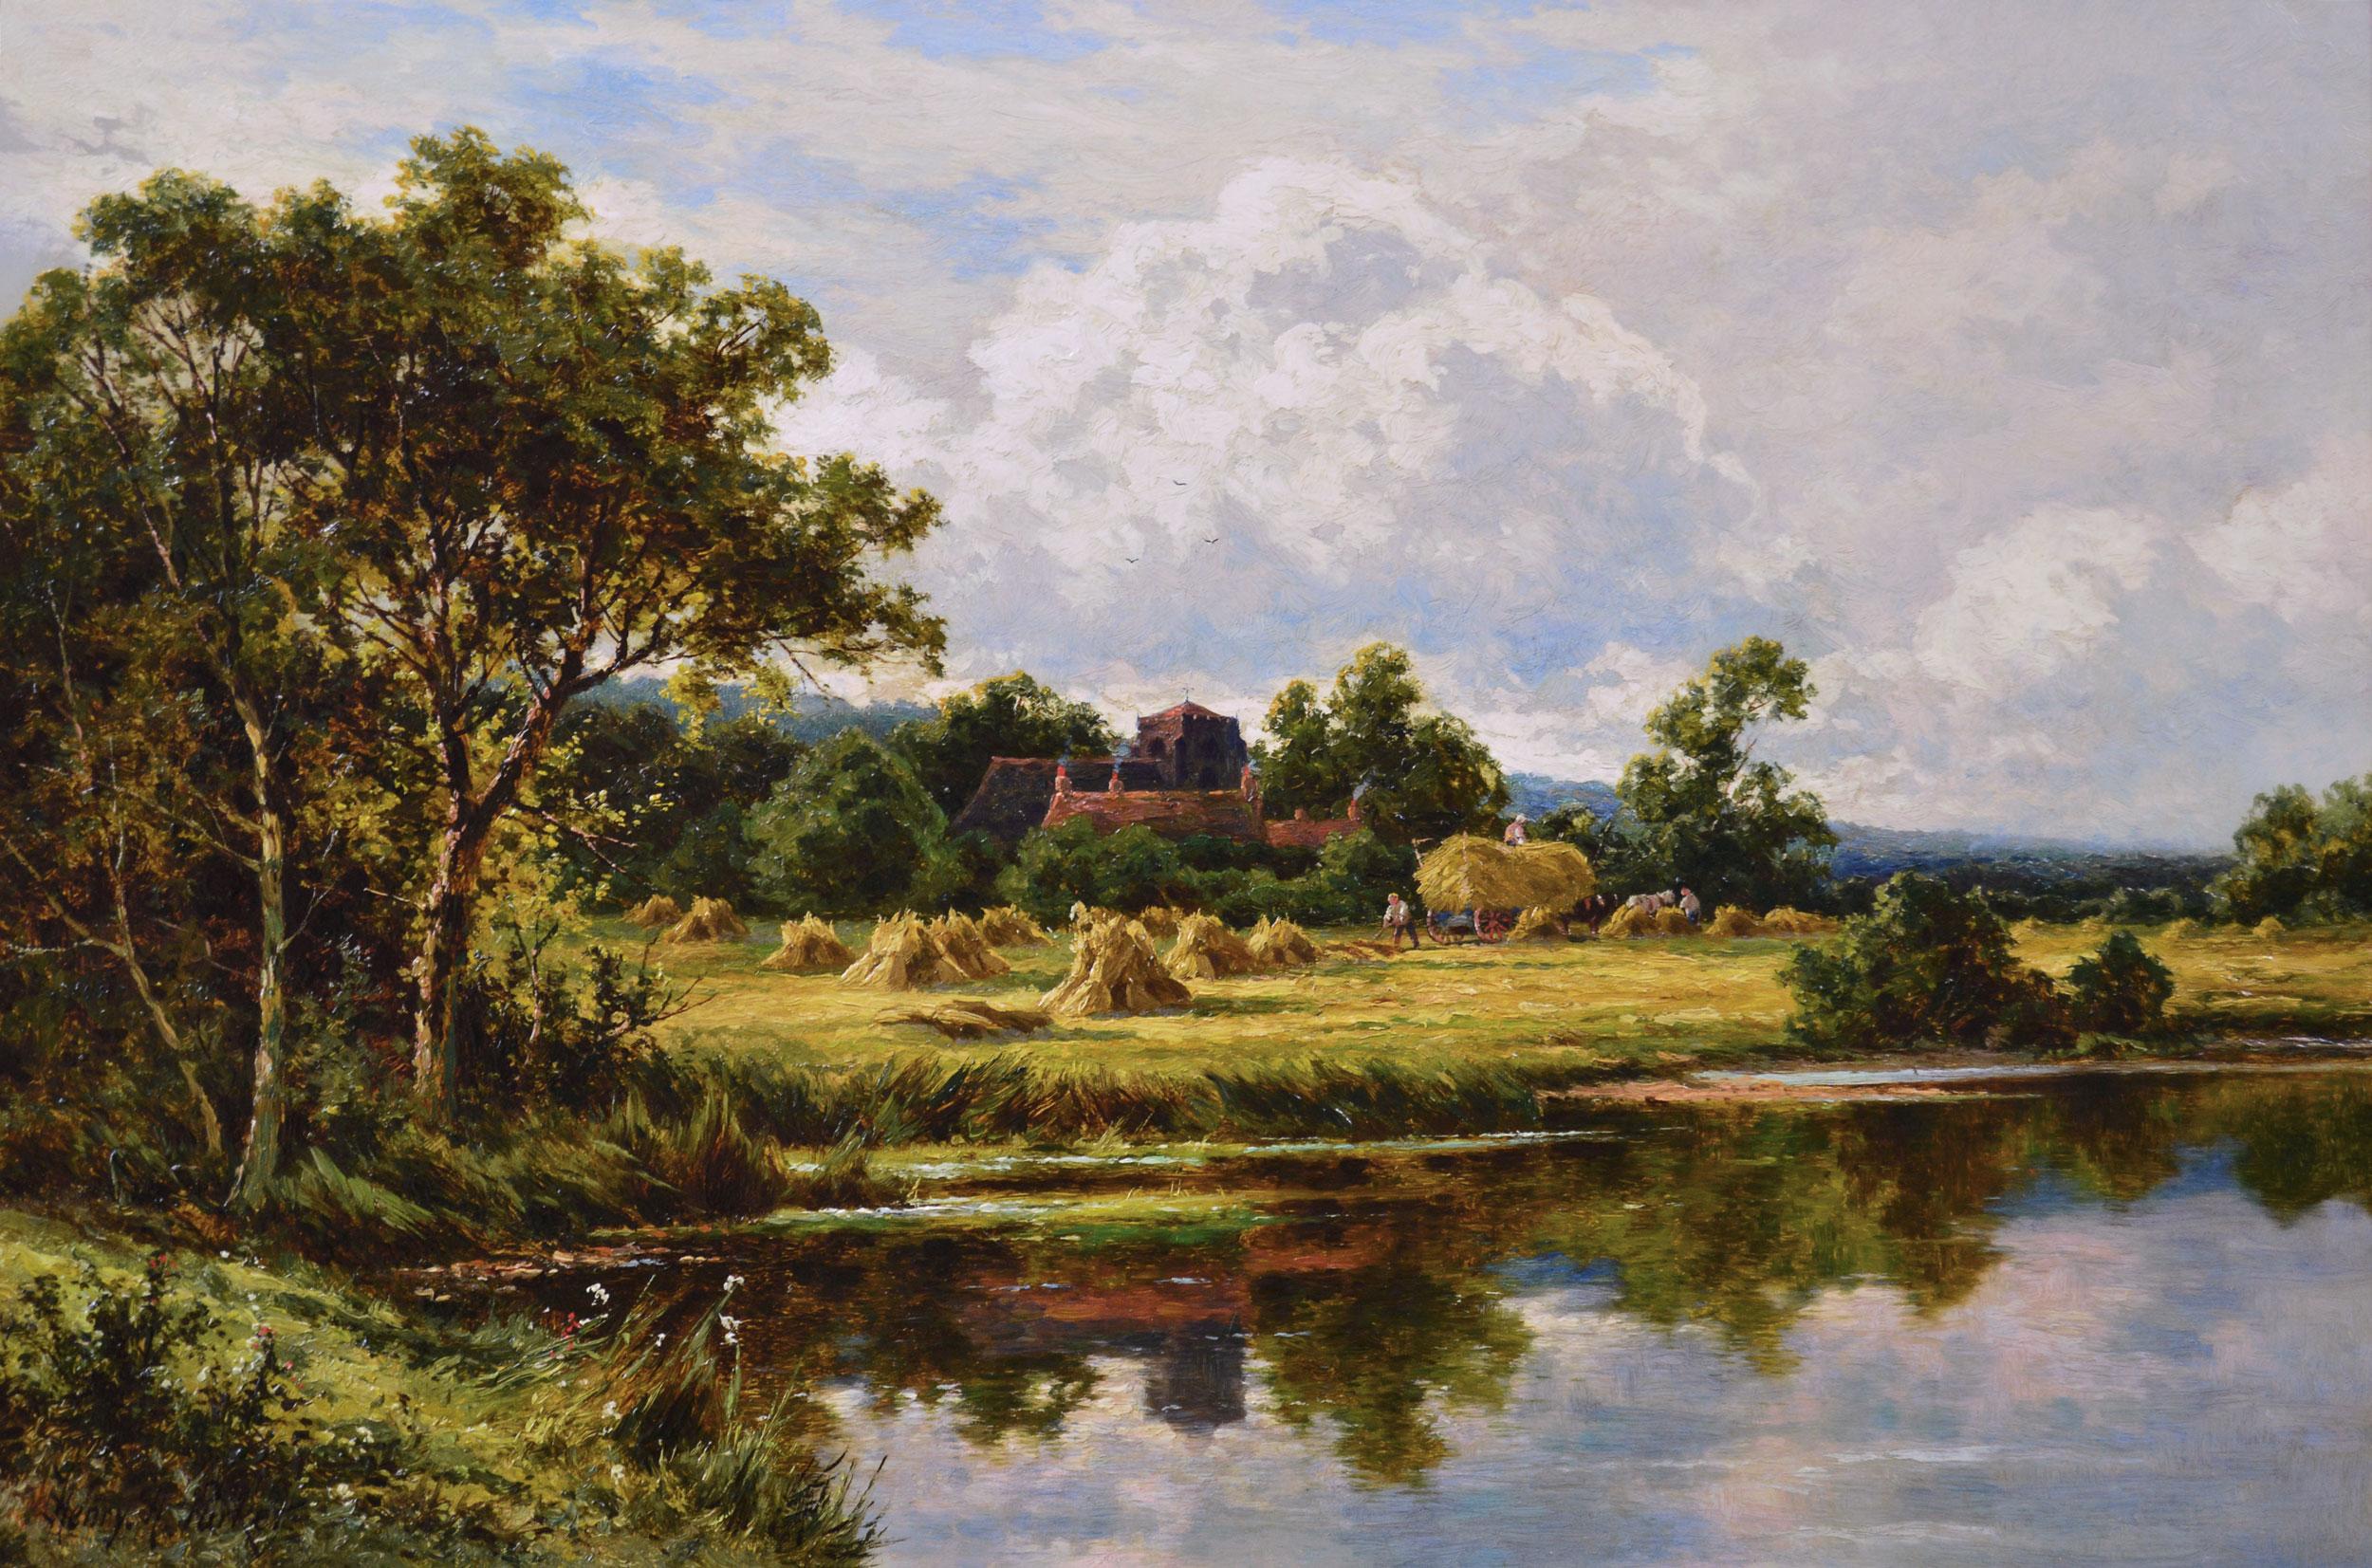 19th Century landscape oil painting of figures harvesting next to a river - Painting by Henry H. Parker